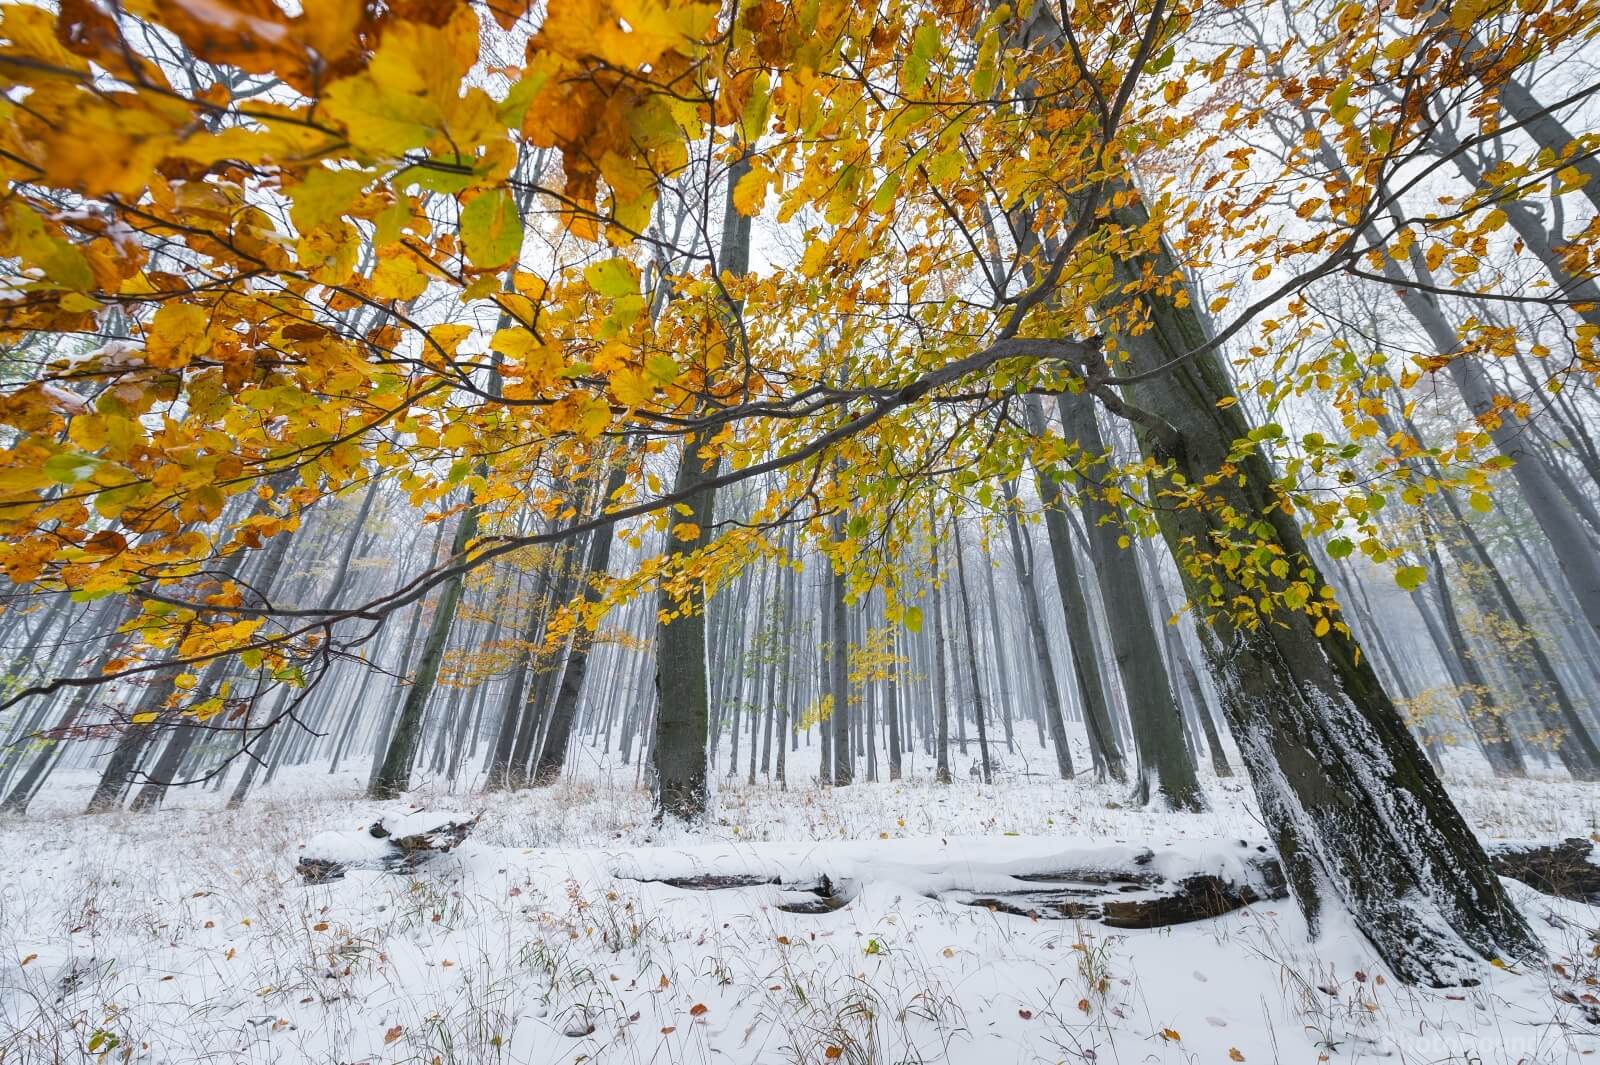 Image of The beech forest under the Studený Hill by VOJTa Herout